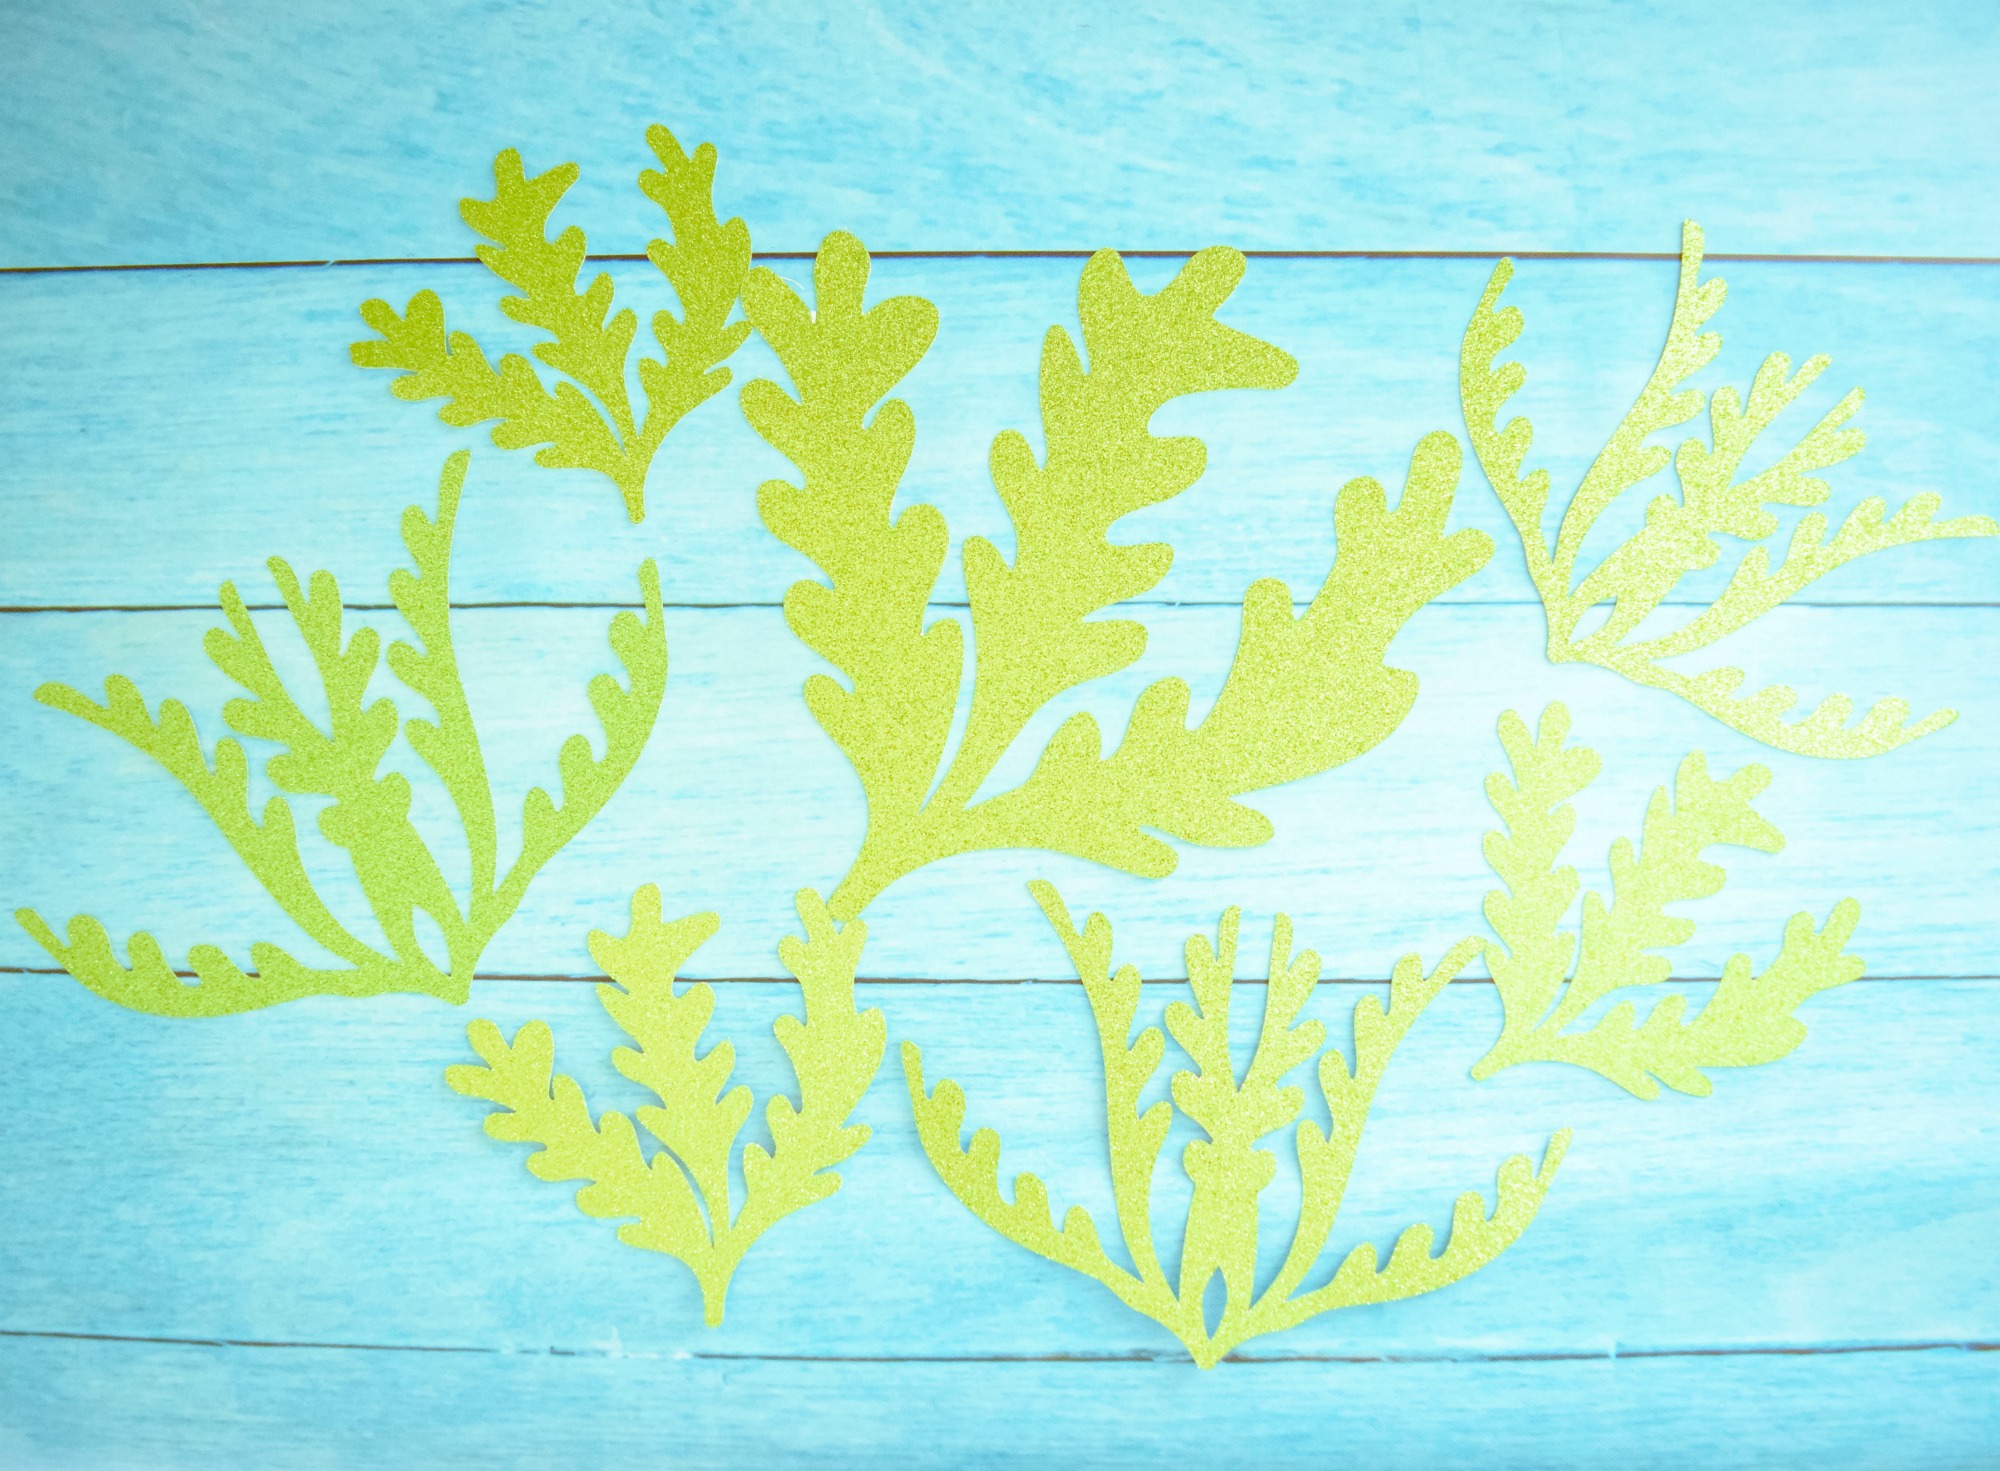 Glitter paper cutouts of seaweed shapes rest on a blue background.